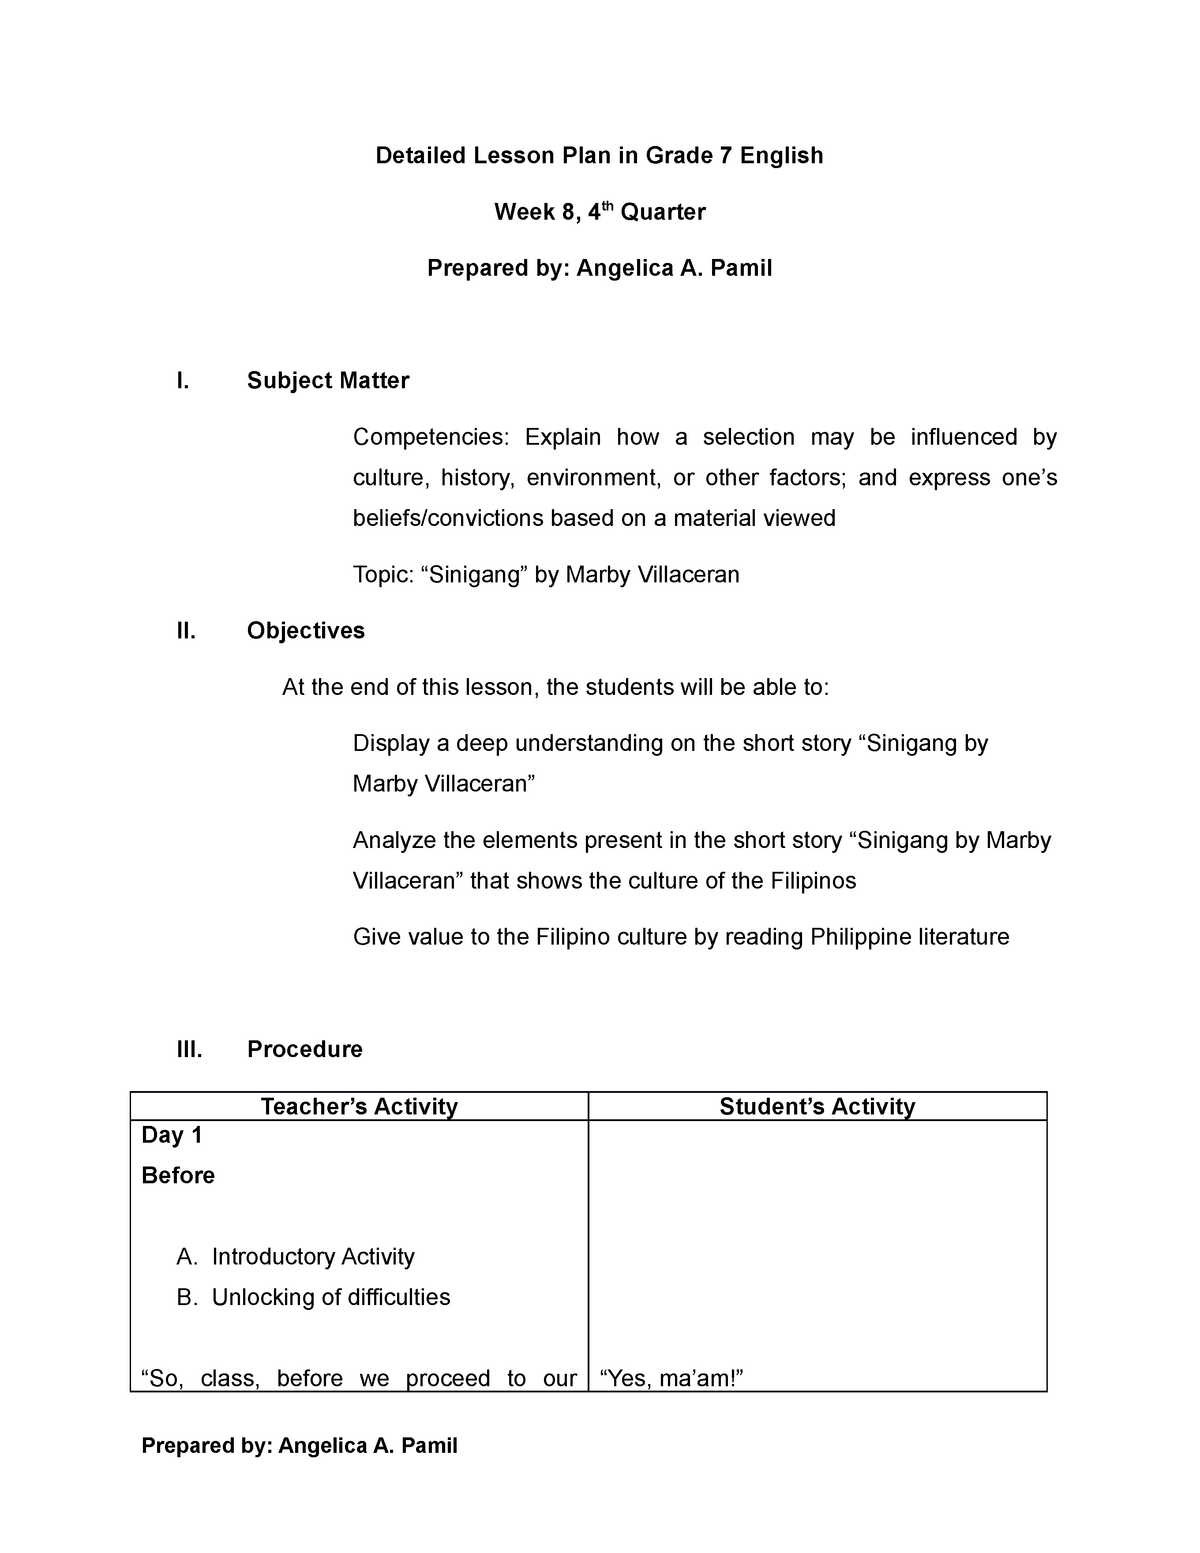 A Detailed Lesson Plan In Tle Grade Vii Learning Vrogue Images And